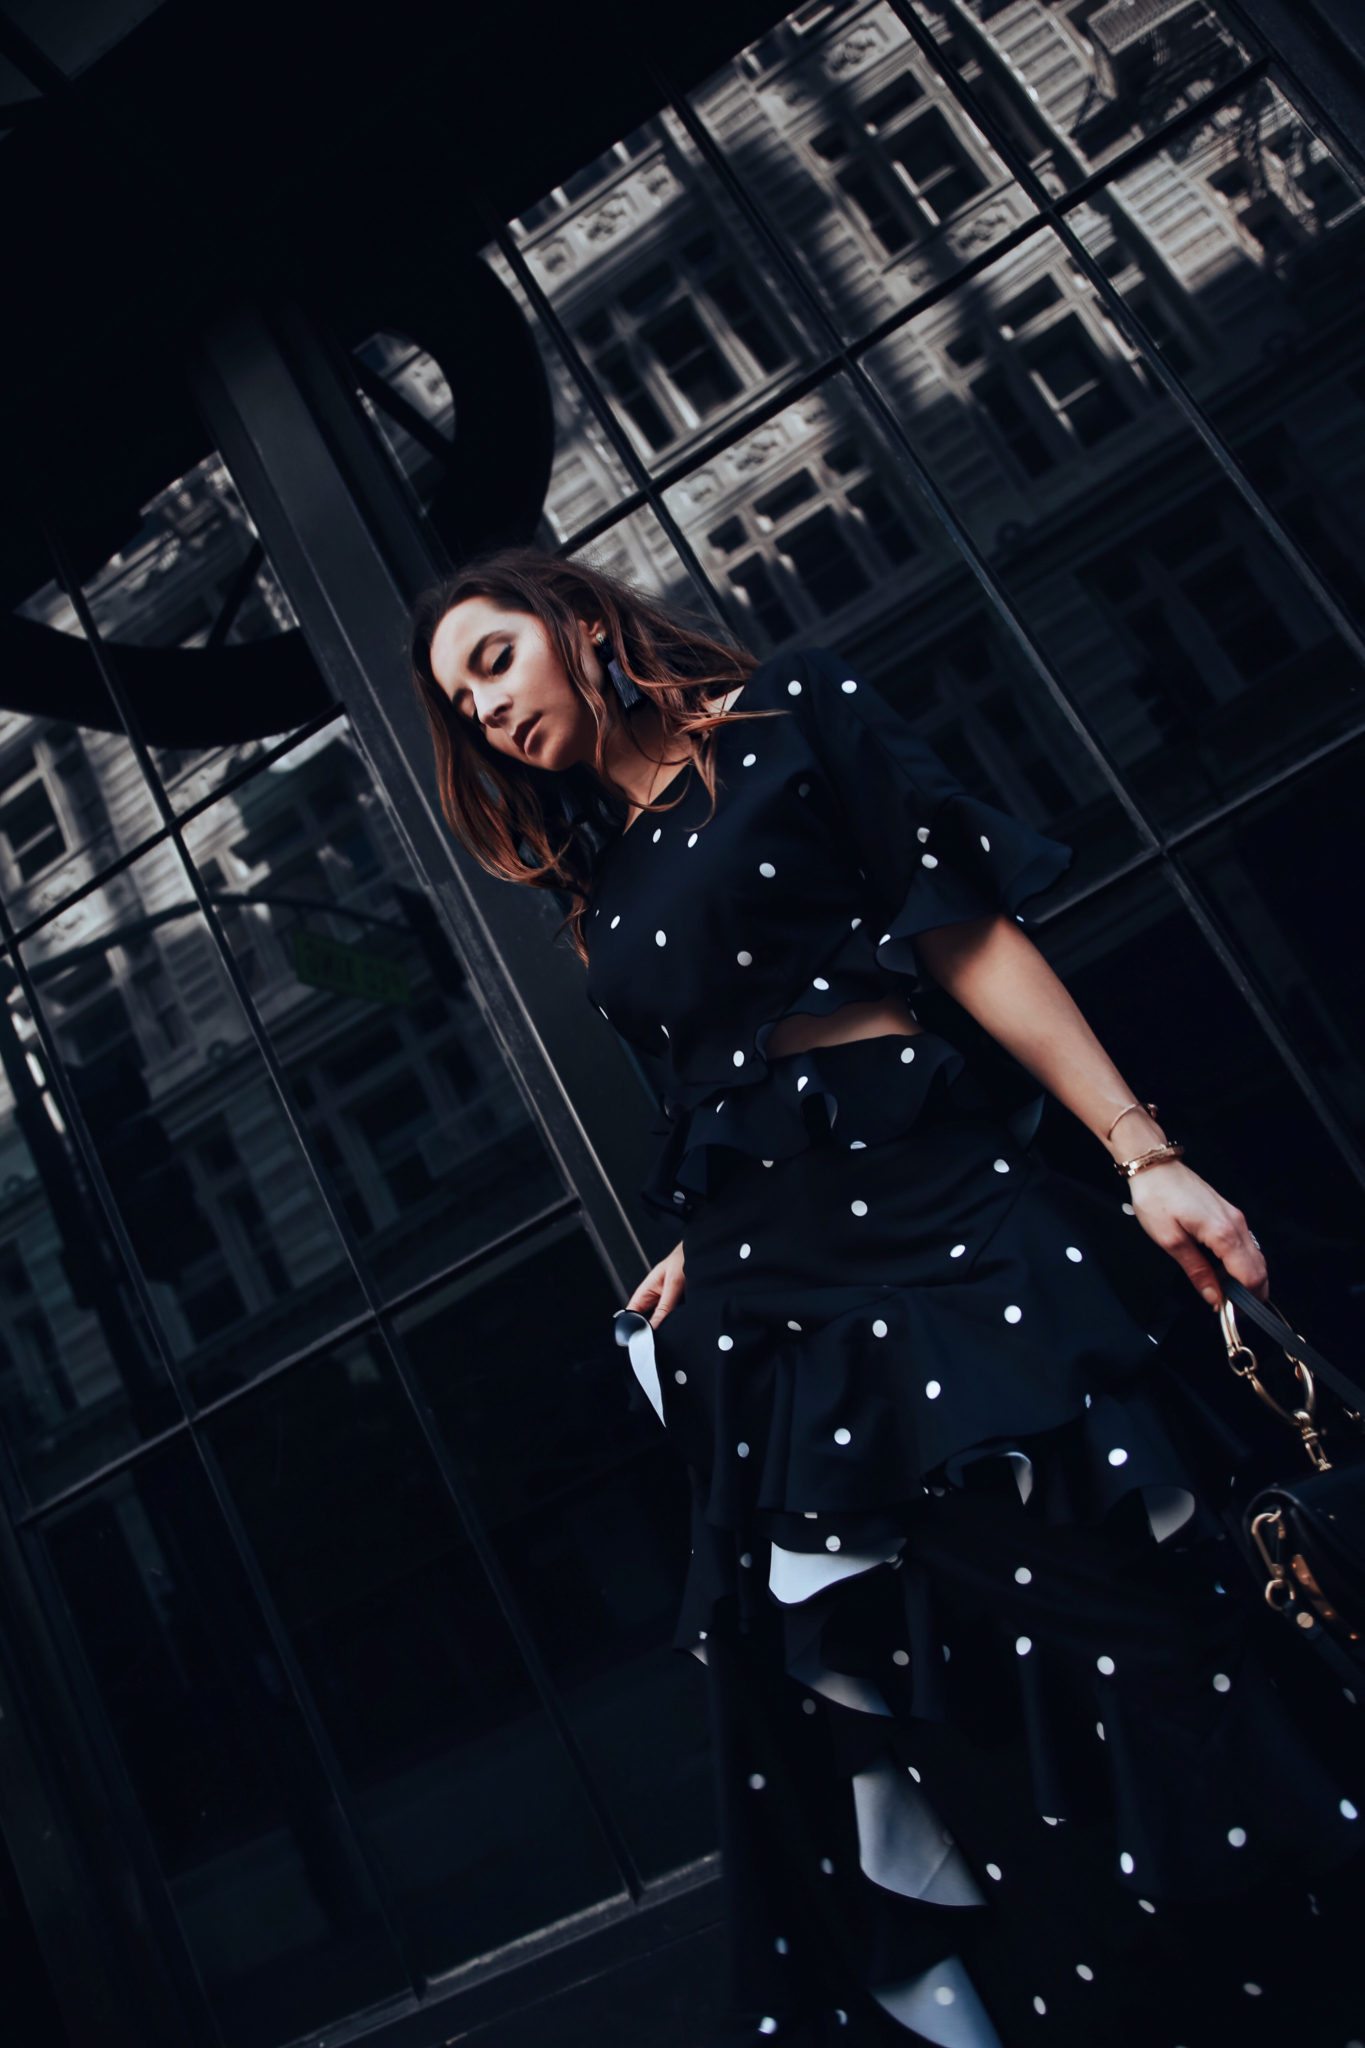 Evening dresses with Fame and Partners, A LA brand specialized in wedding party dresses. Julia Comil, French Fashion blogger in Los Angeles features the black and white polka dots Marisa dress from Fame and Partners - shot in Downtown Los Angeles